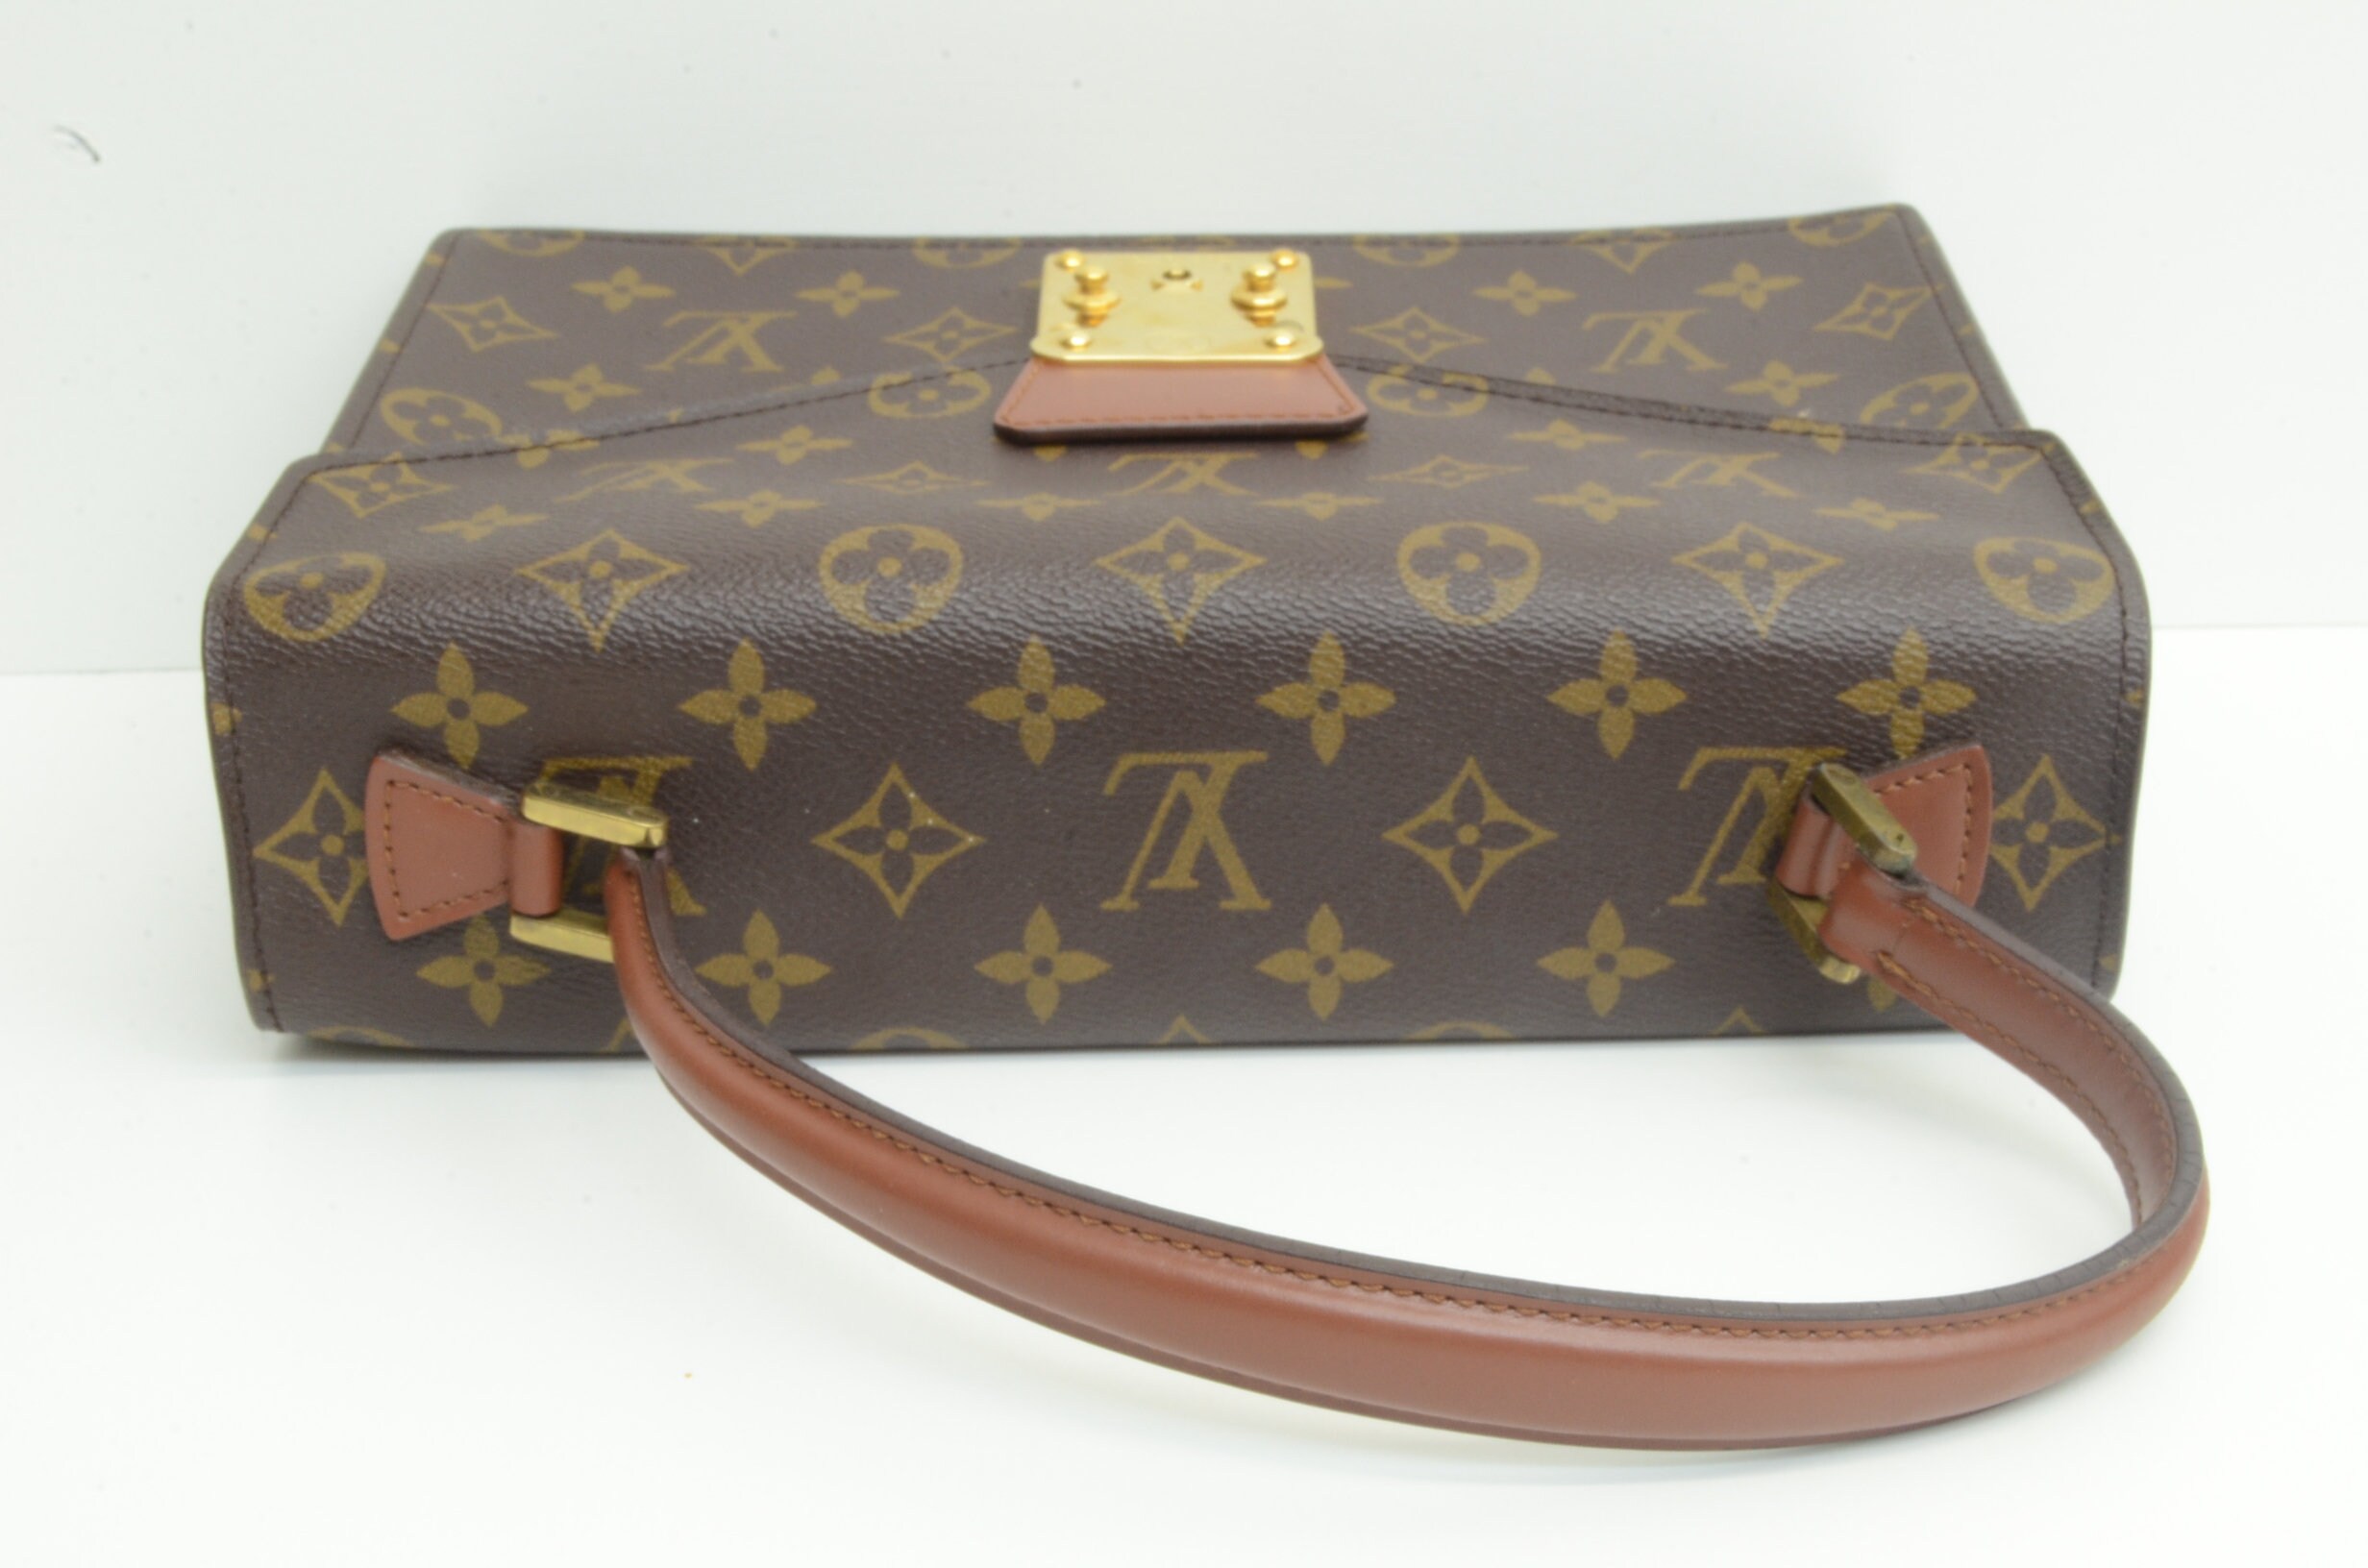 Vintage Louis Vuitton Concorde Handbag Review, HOW MUCH I PAID